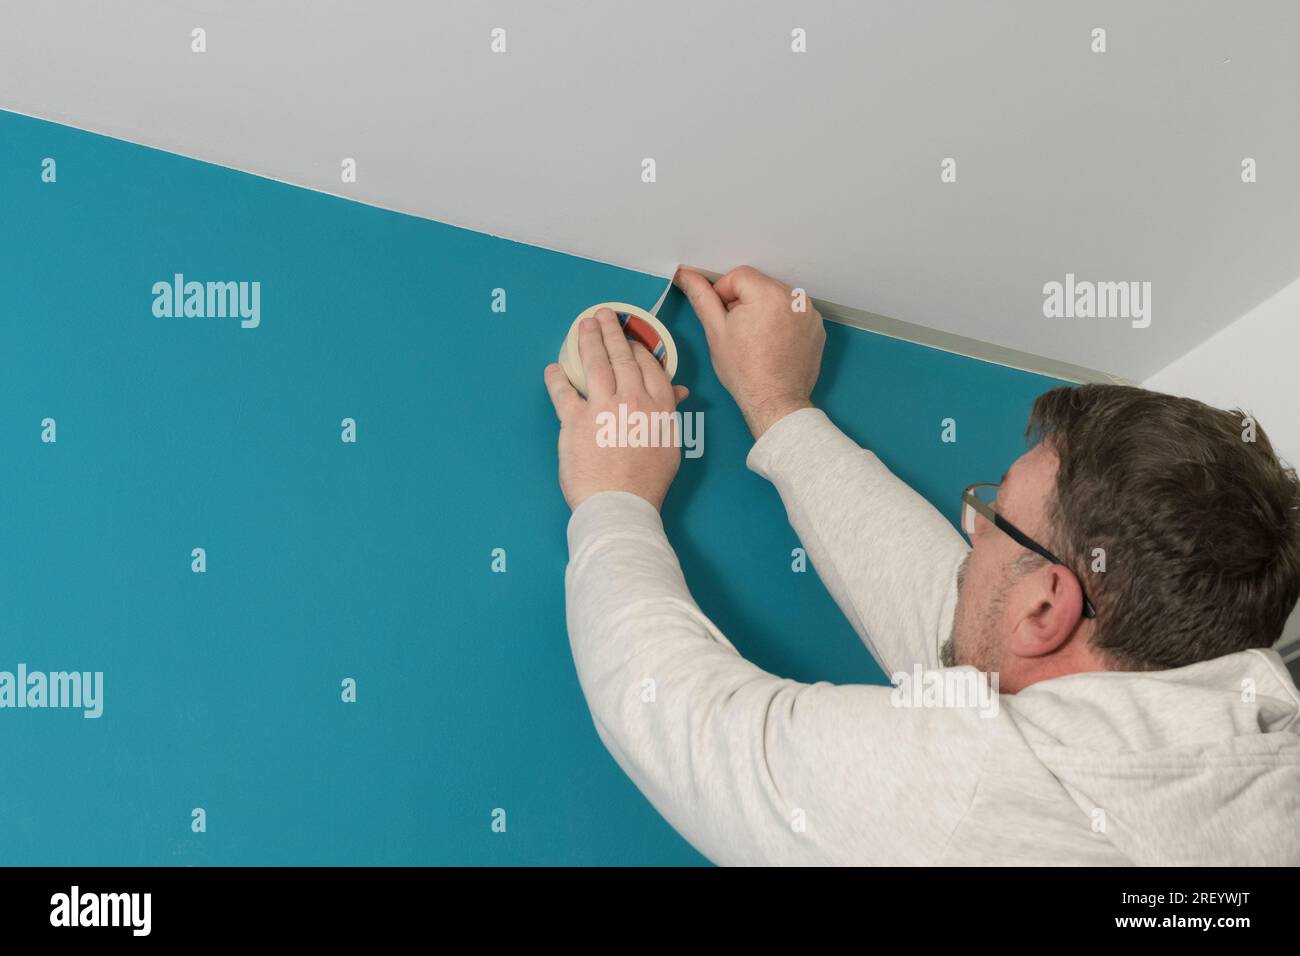 Blue Painters Tape on White Stock Image - Image of painters, tape